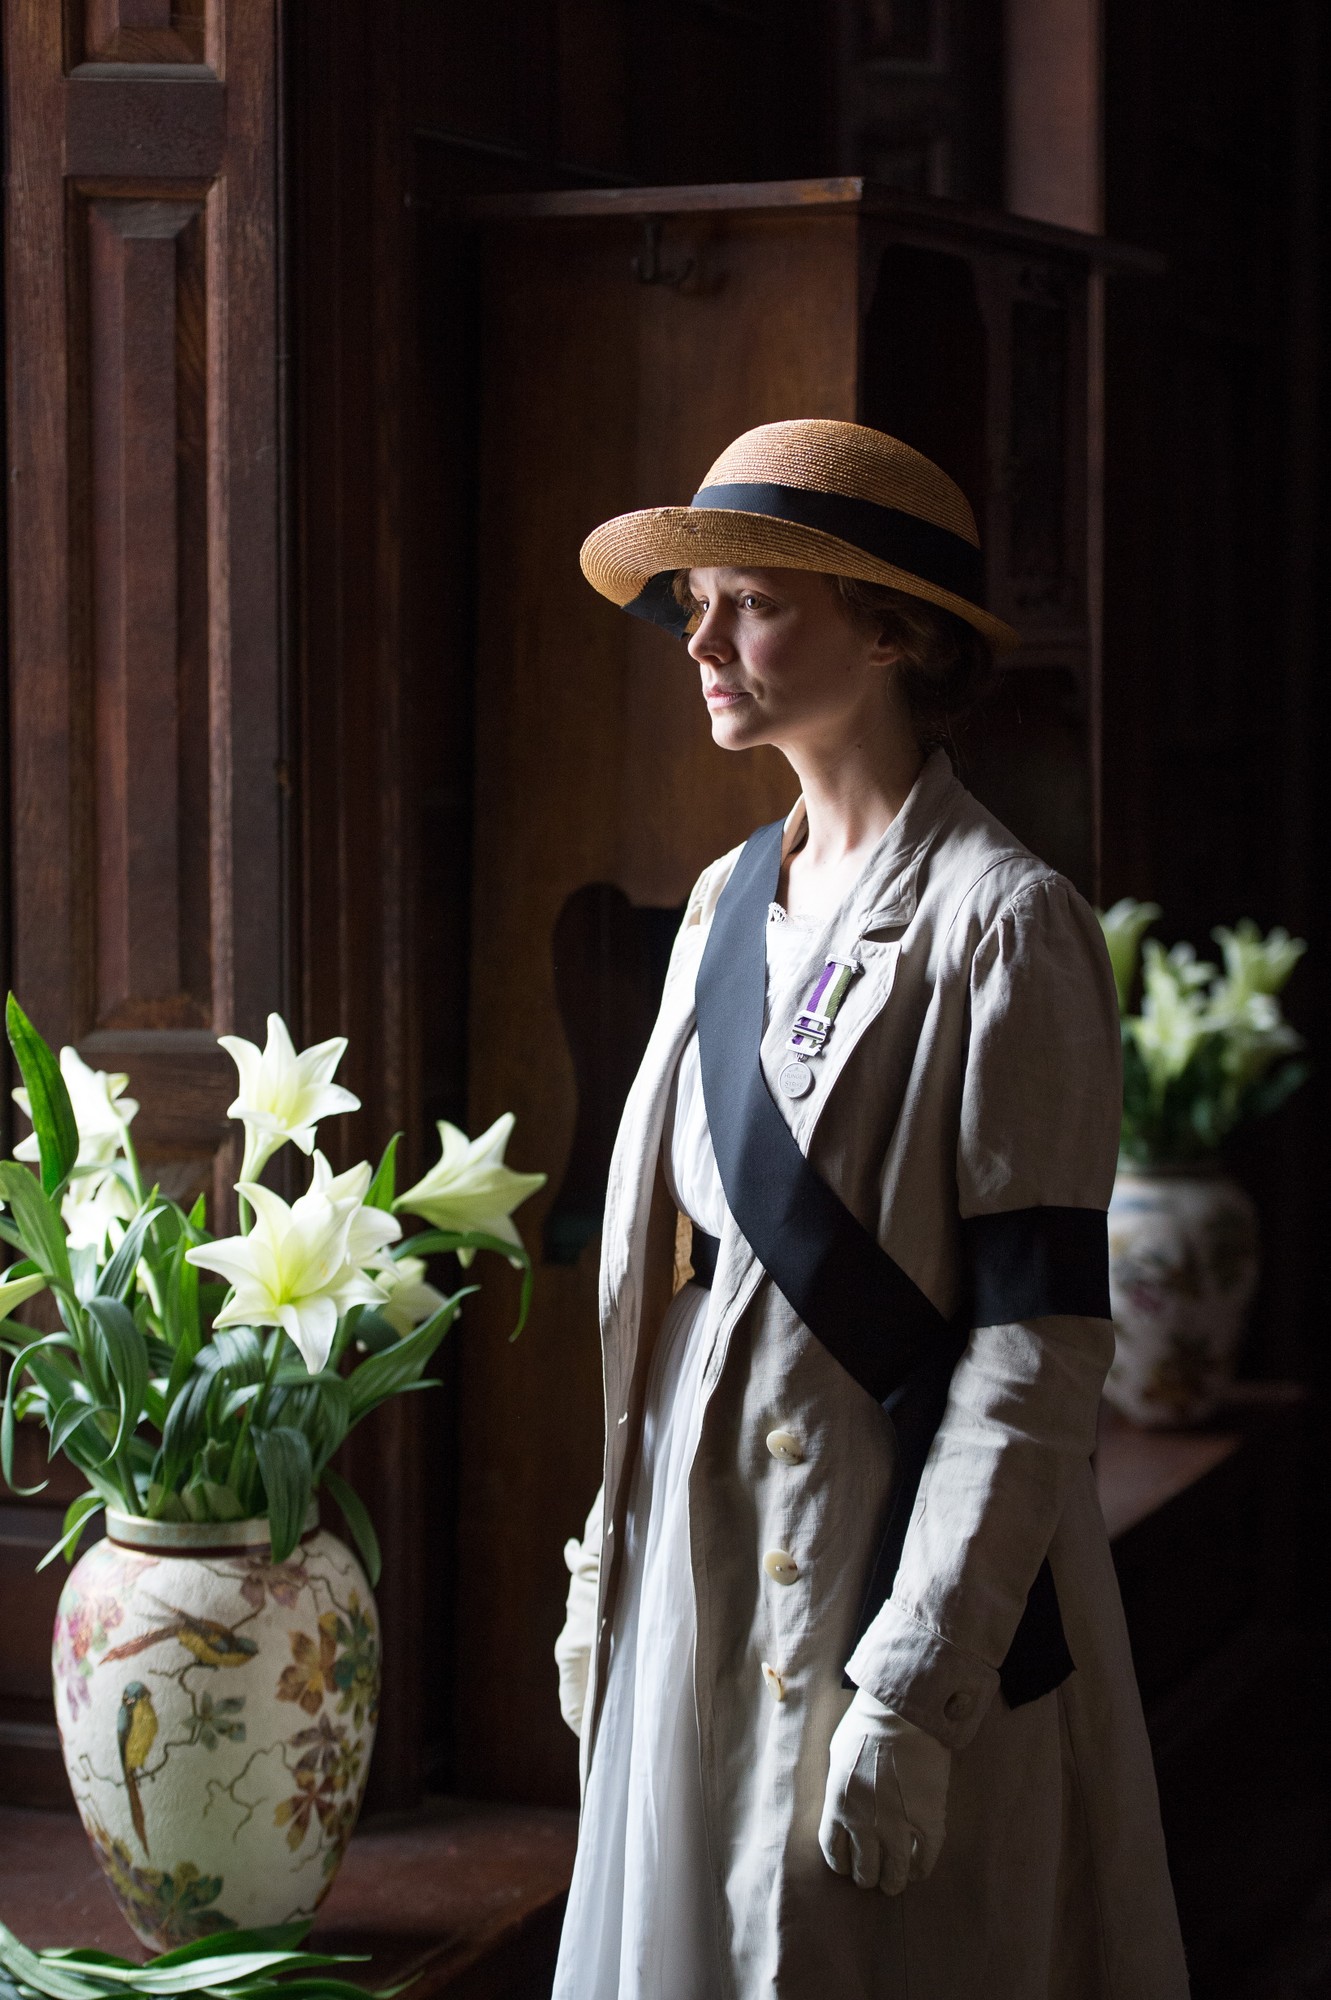 “Suffragette” Interview With Actress Carey Mulligan